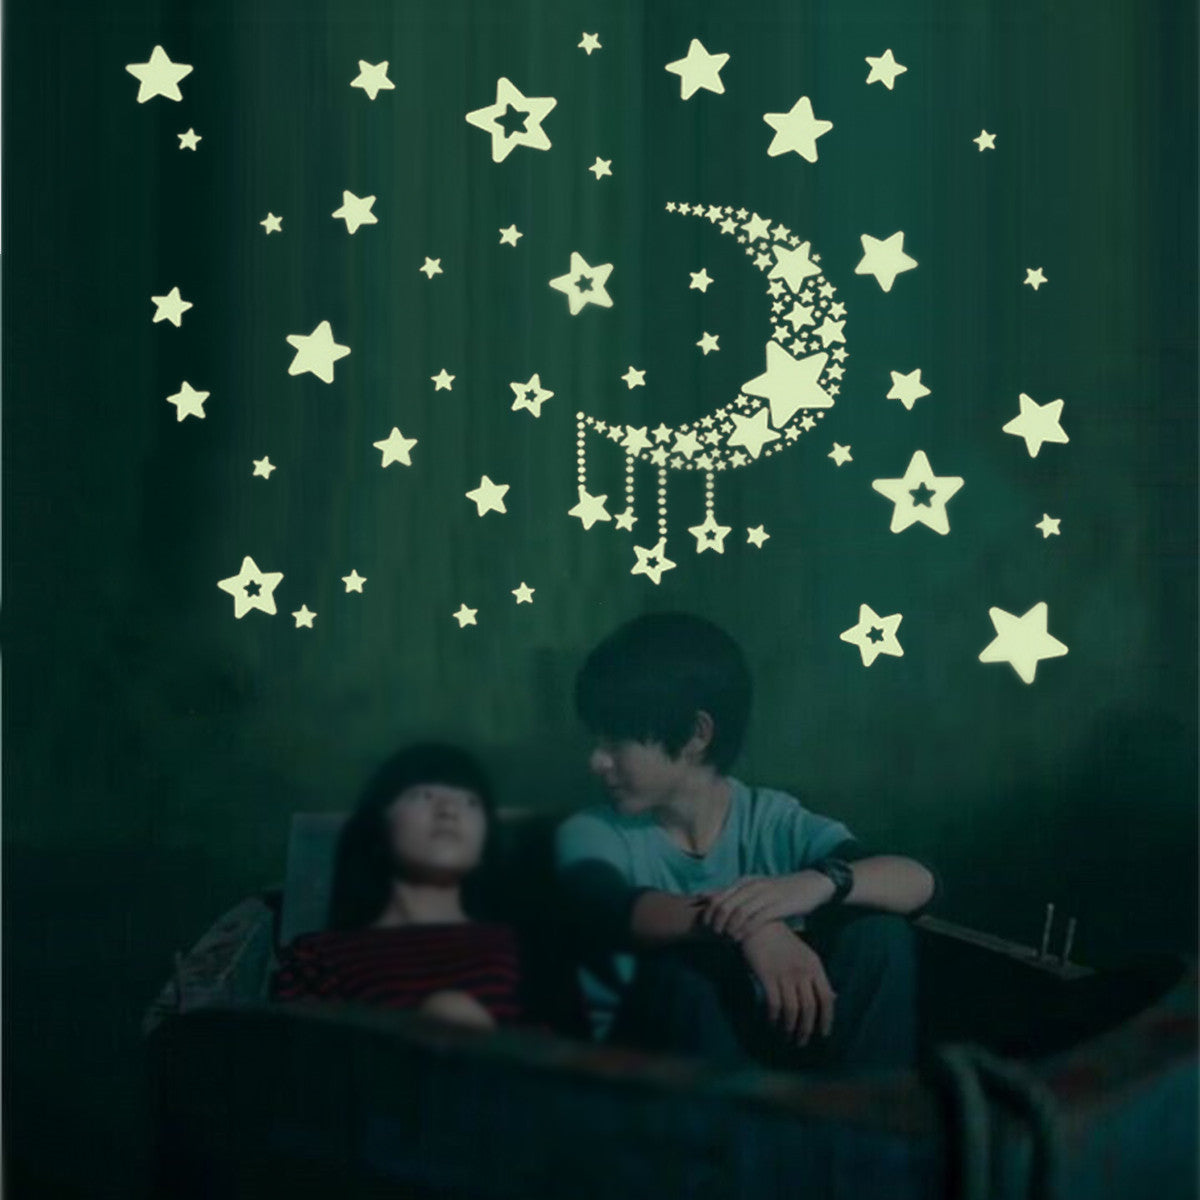 Miico Luminous Star and Moon Creative PVC Wall Sticker Home Decor Mural Art Removable Wall Decals